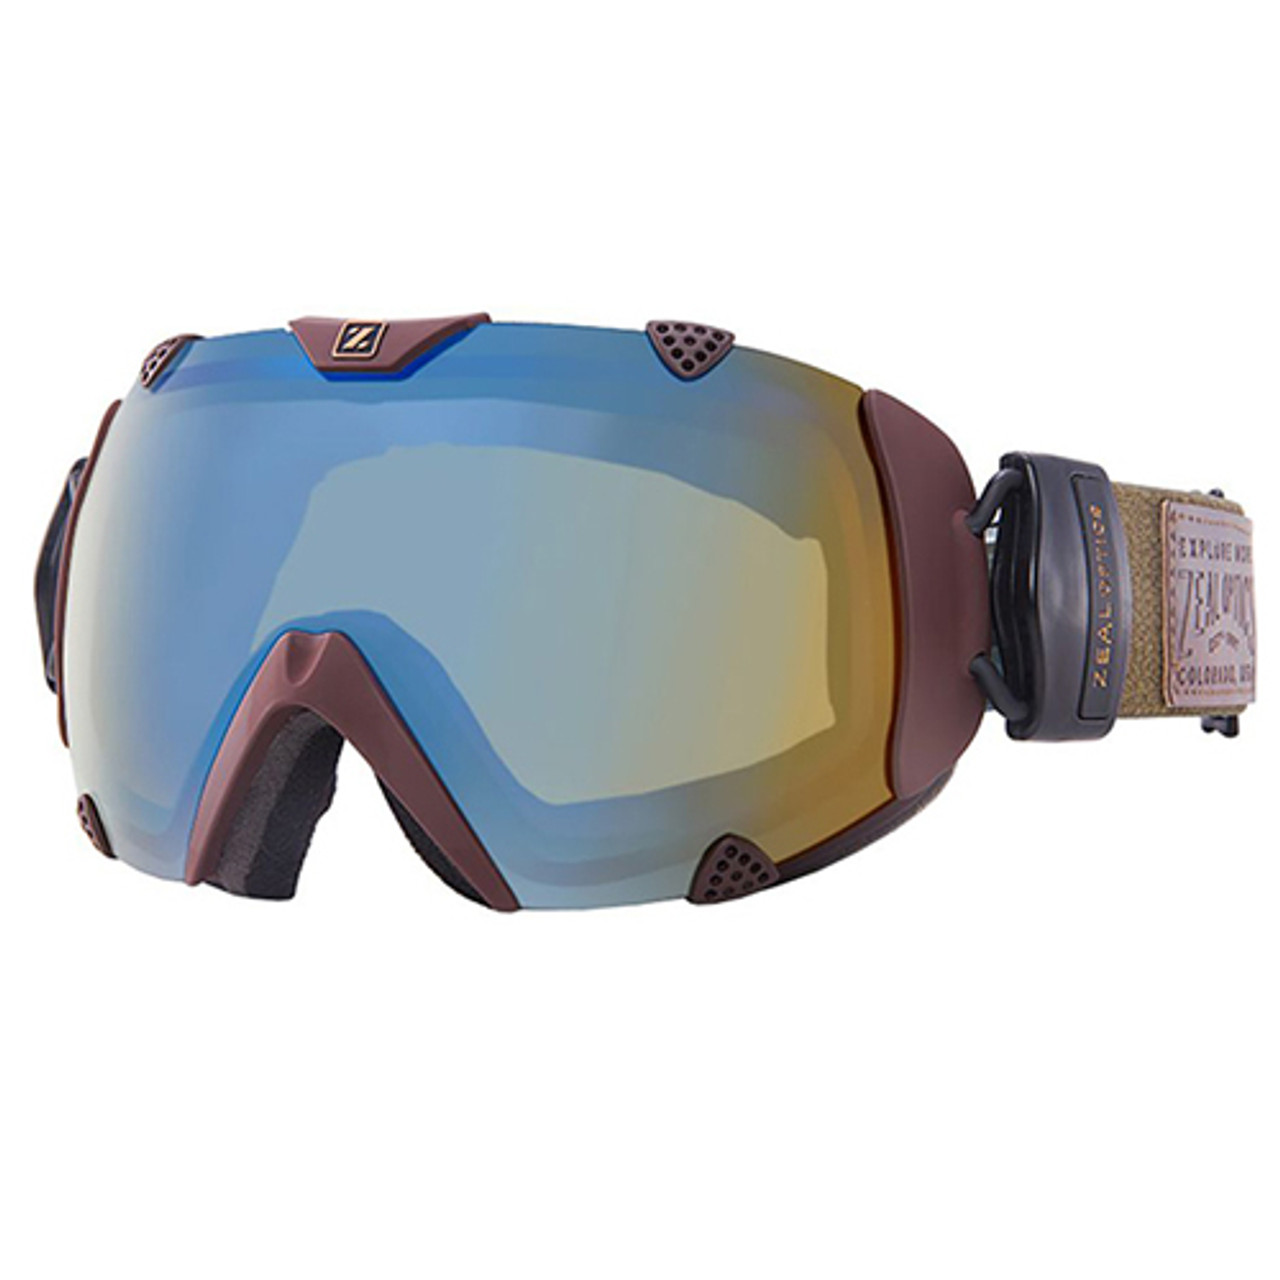 Lens for Zeal Eclipse Ski Goggles